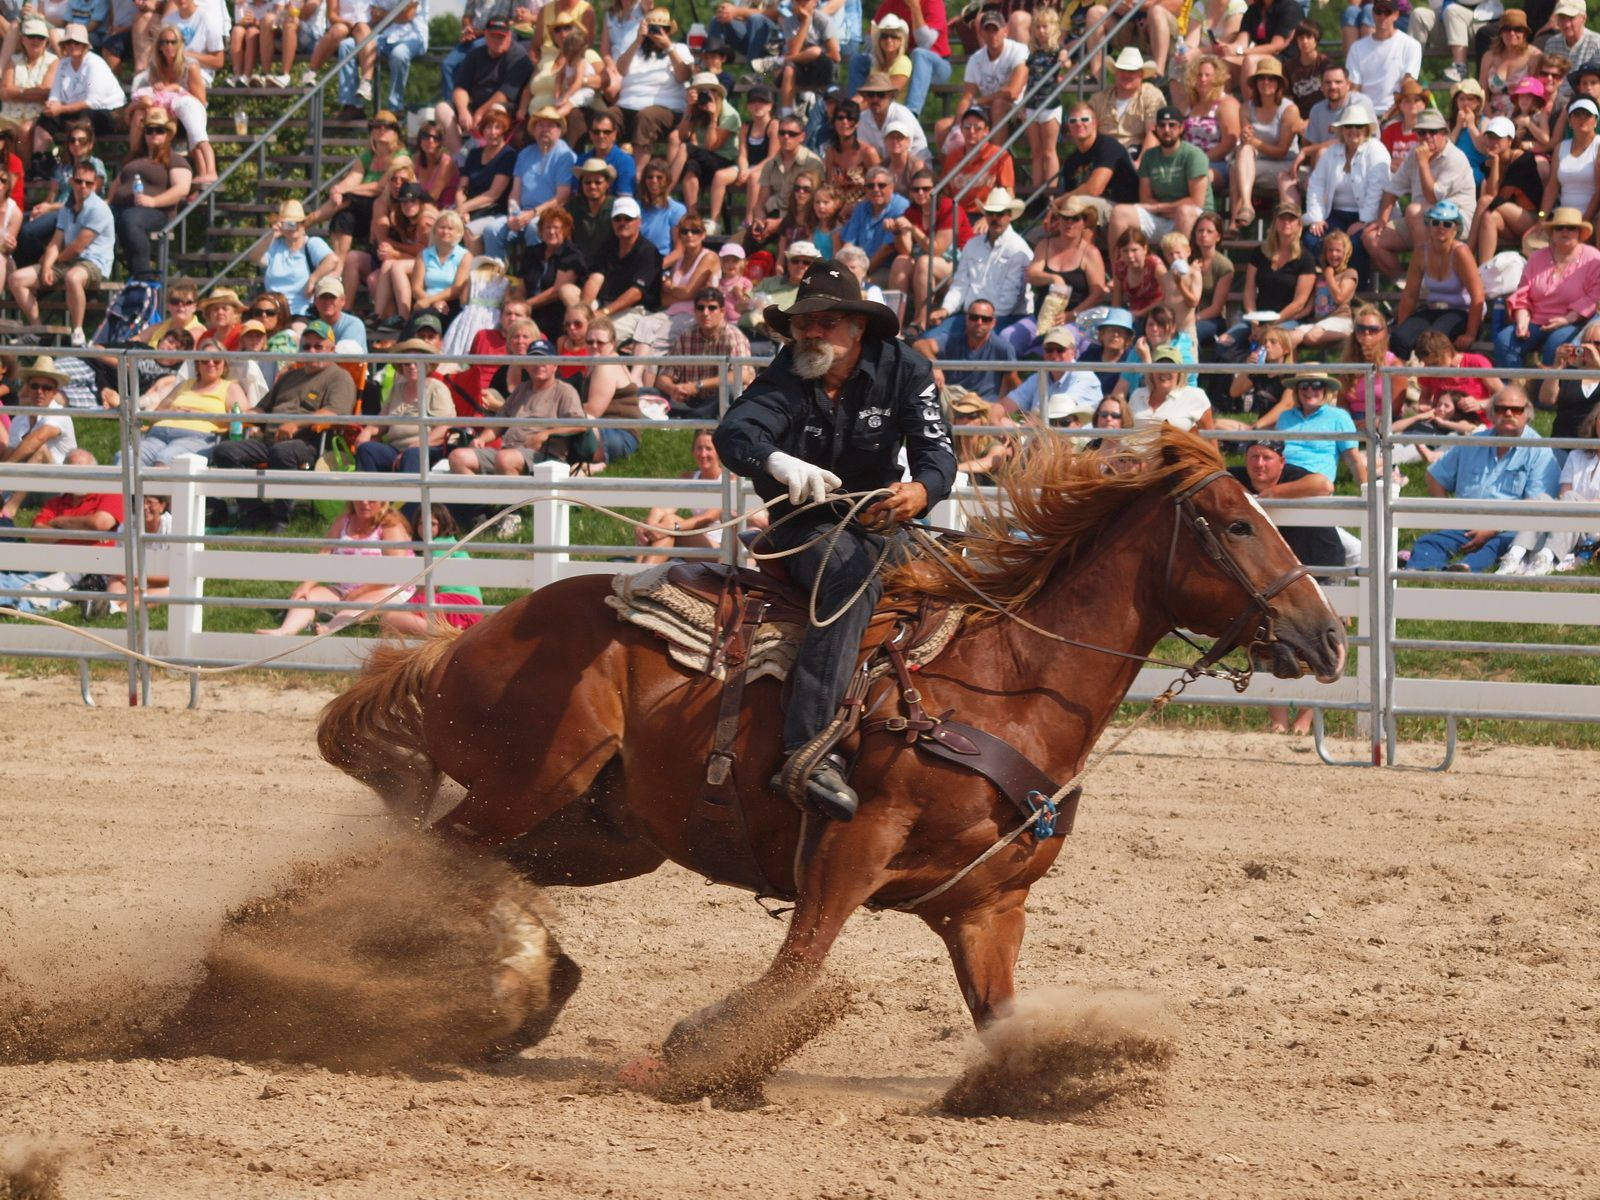 "Focusing on the finish line: Barrel racing at its best" Wallpaper